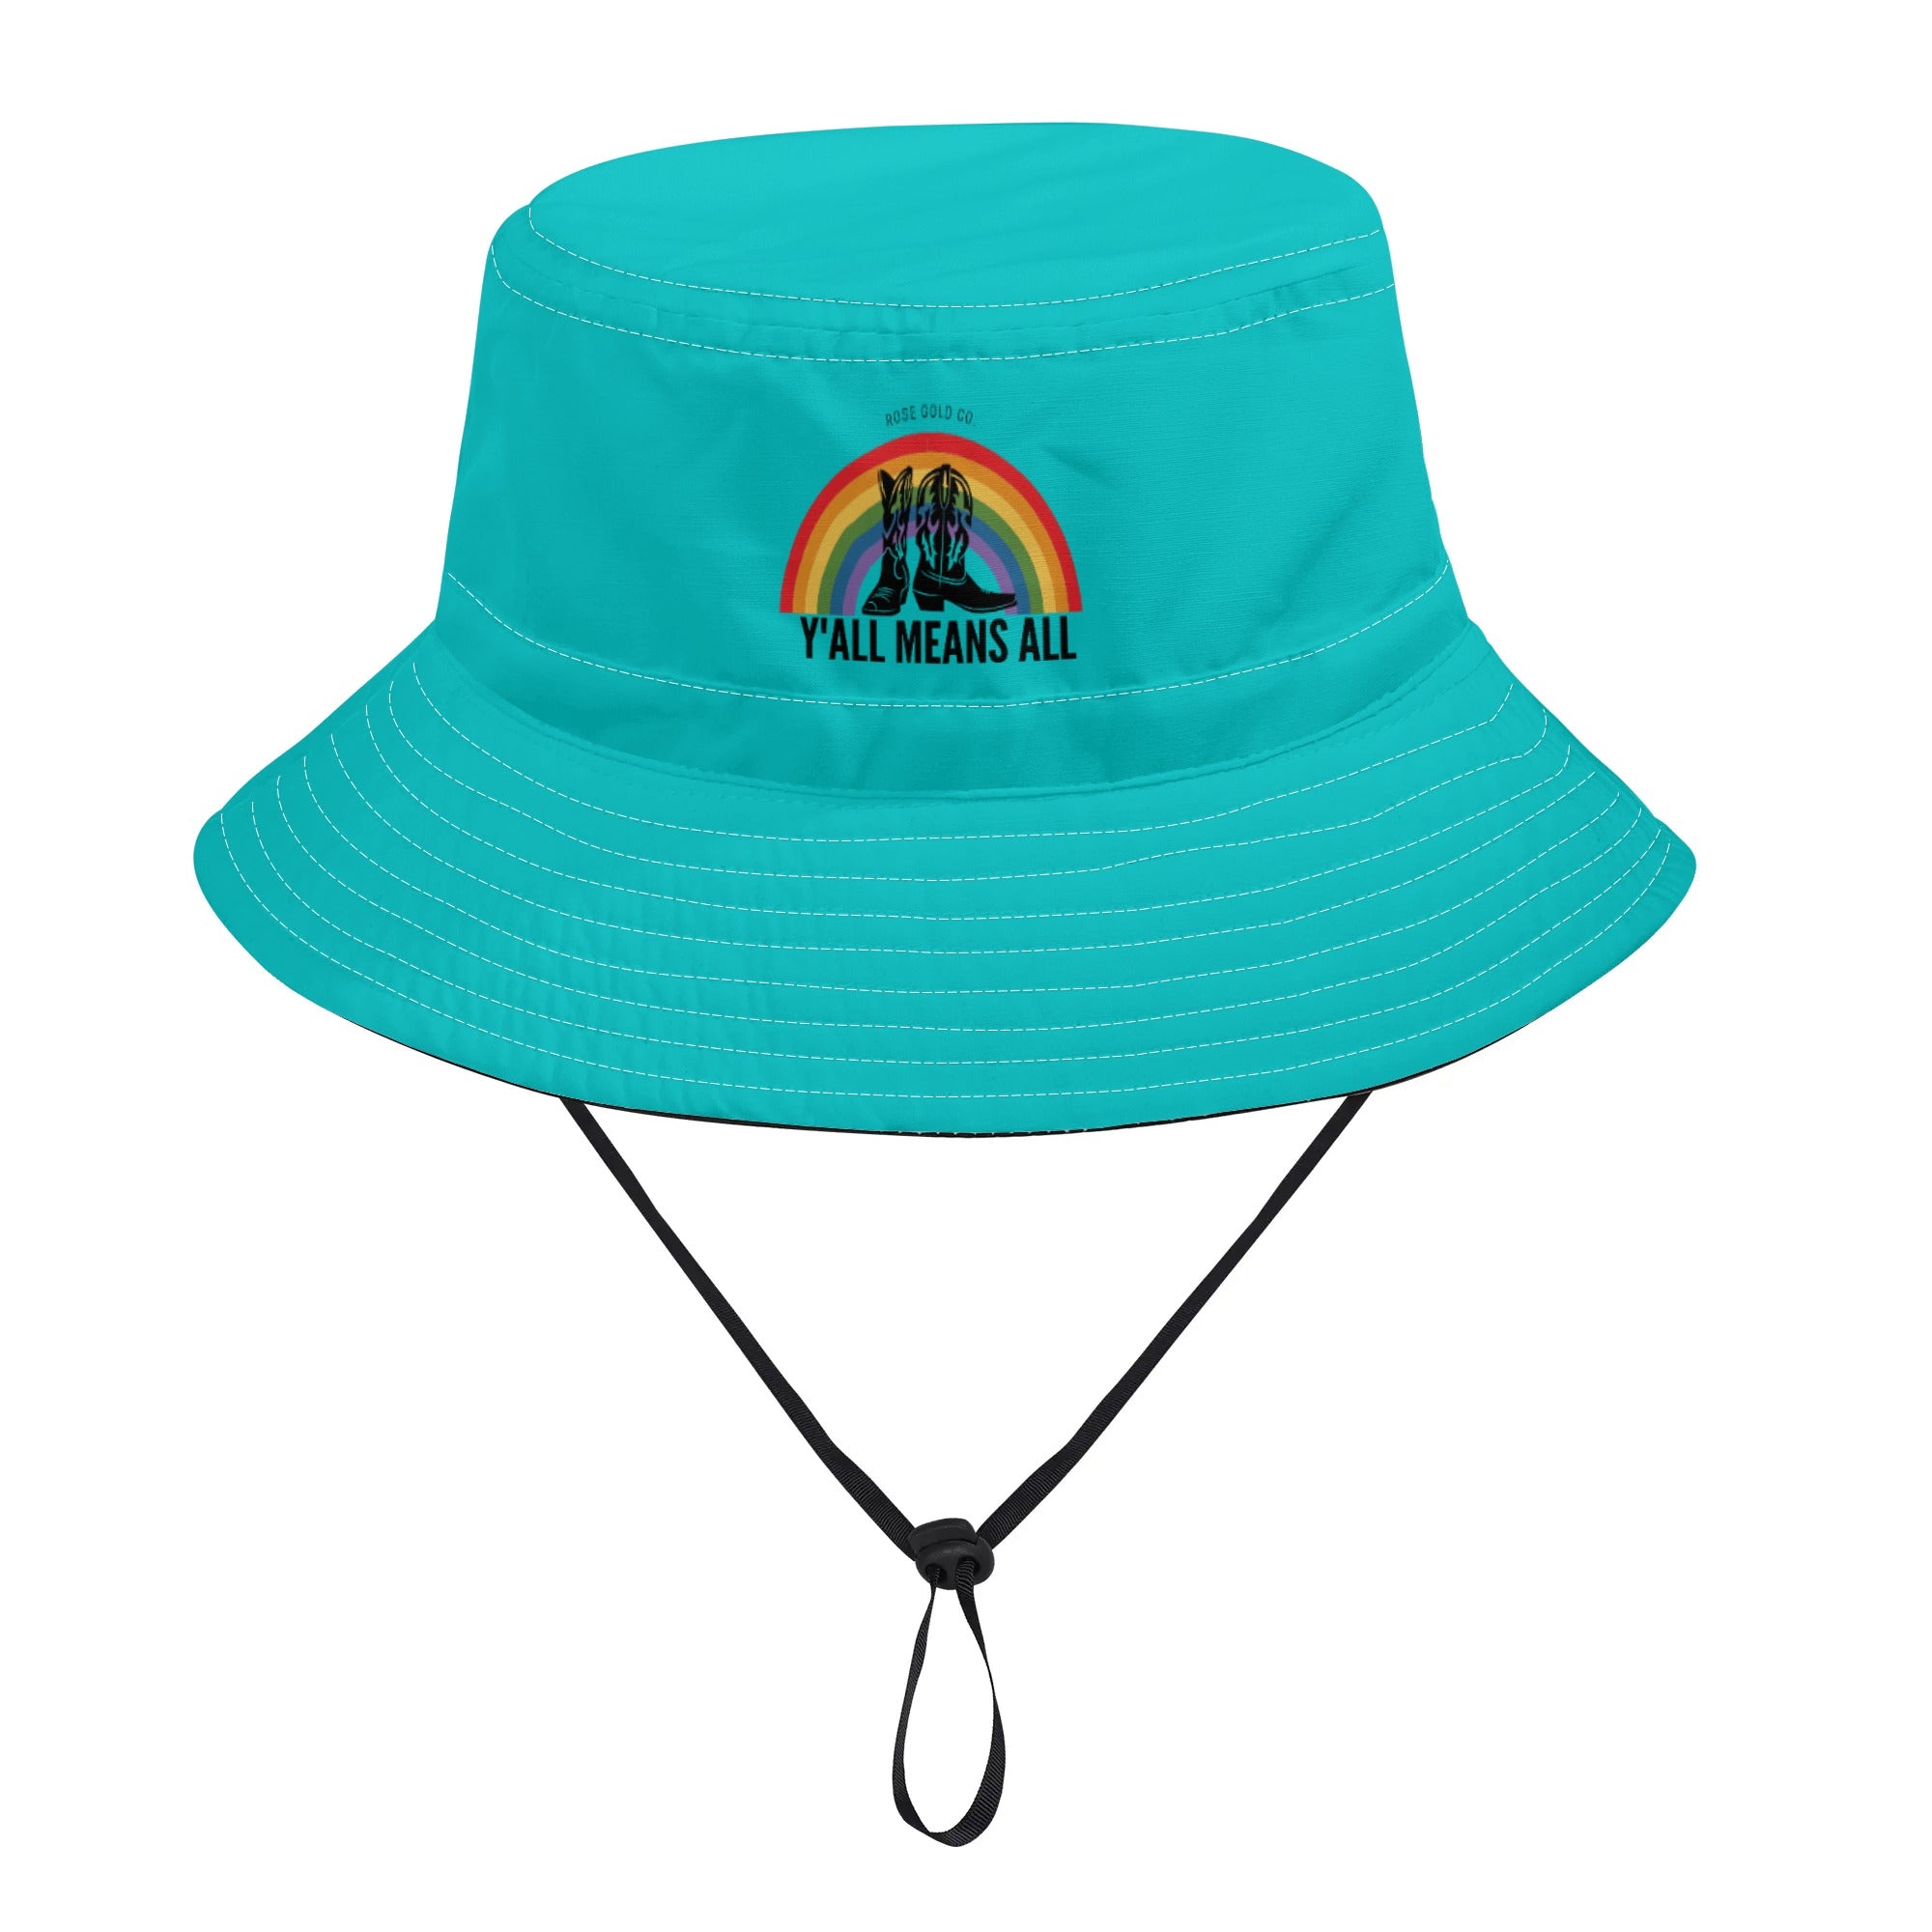 Yall Means All Bucket Hat with Adjustable String